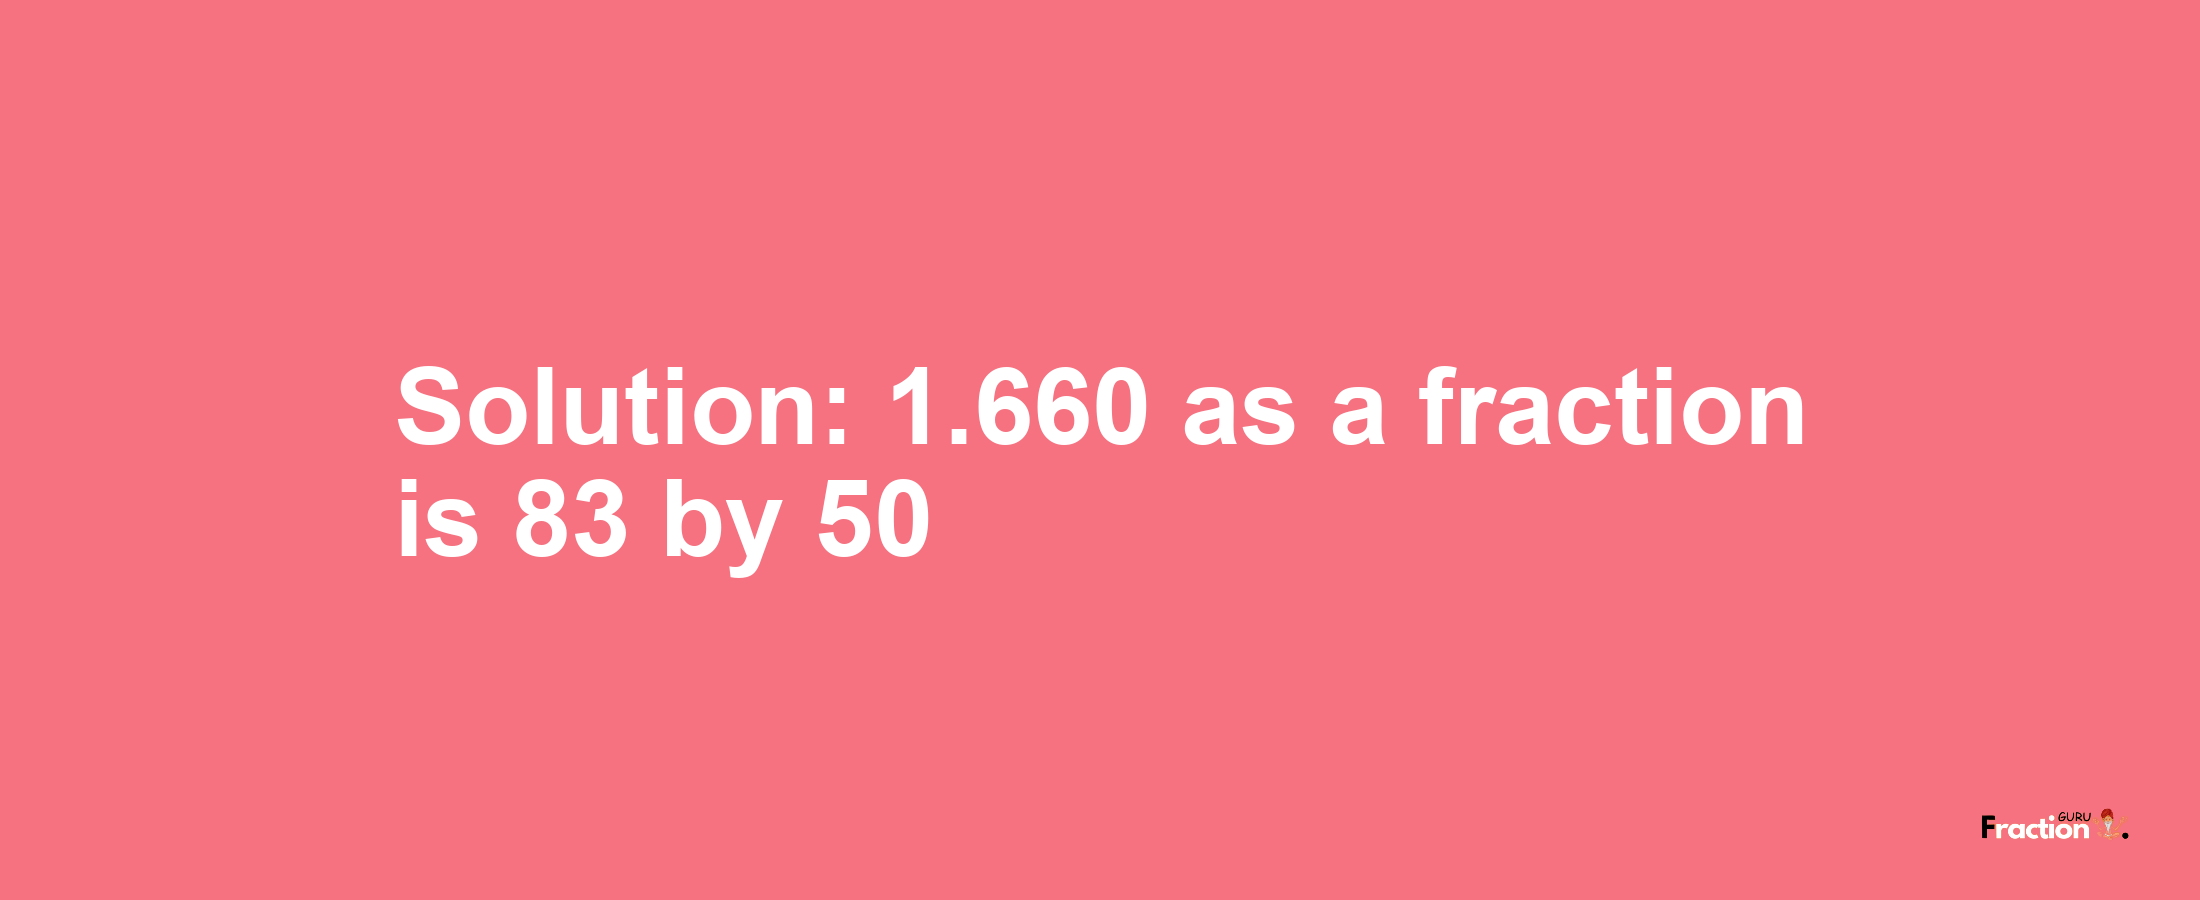 Solution:1.660 as a fraction is 83/50